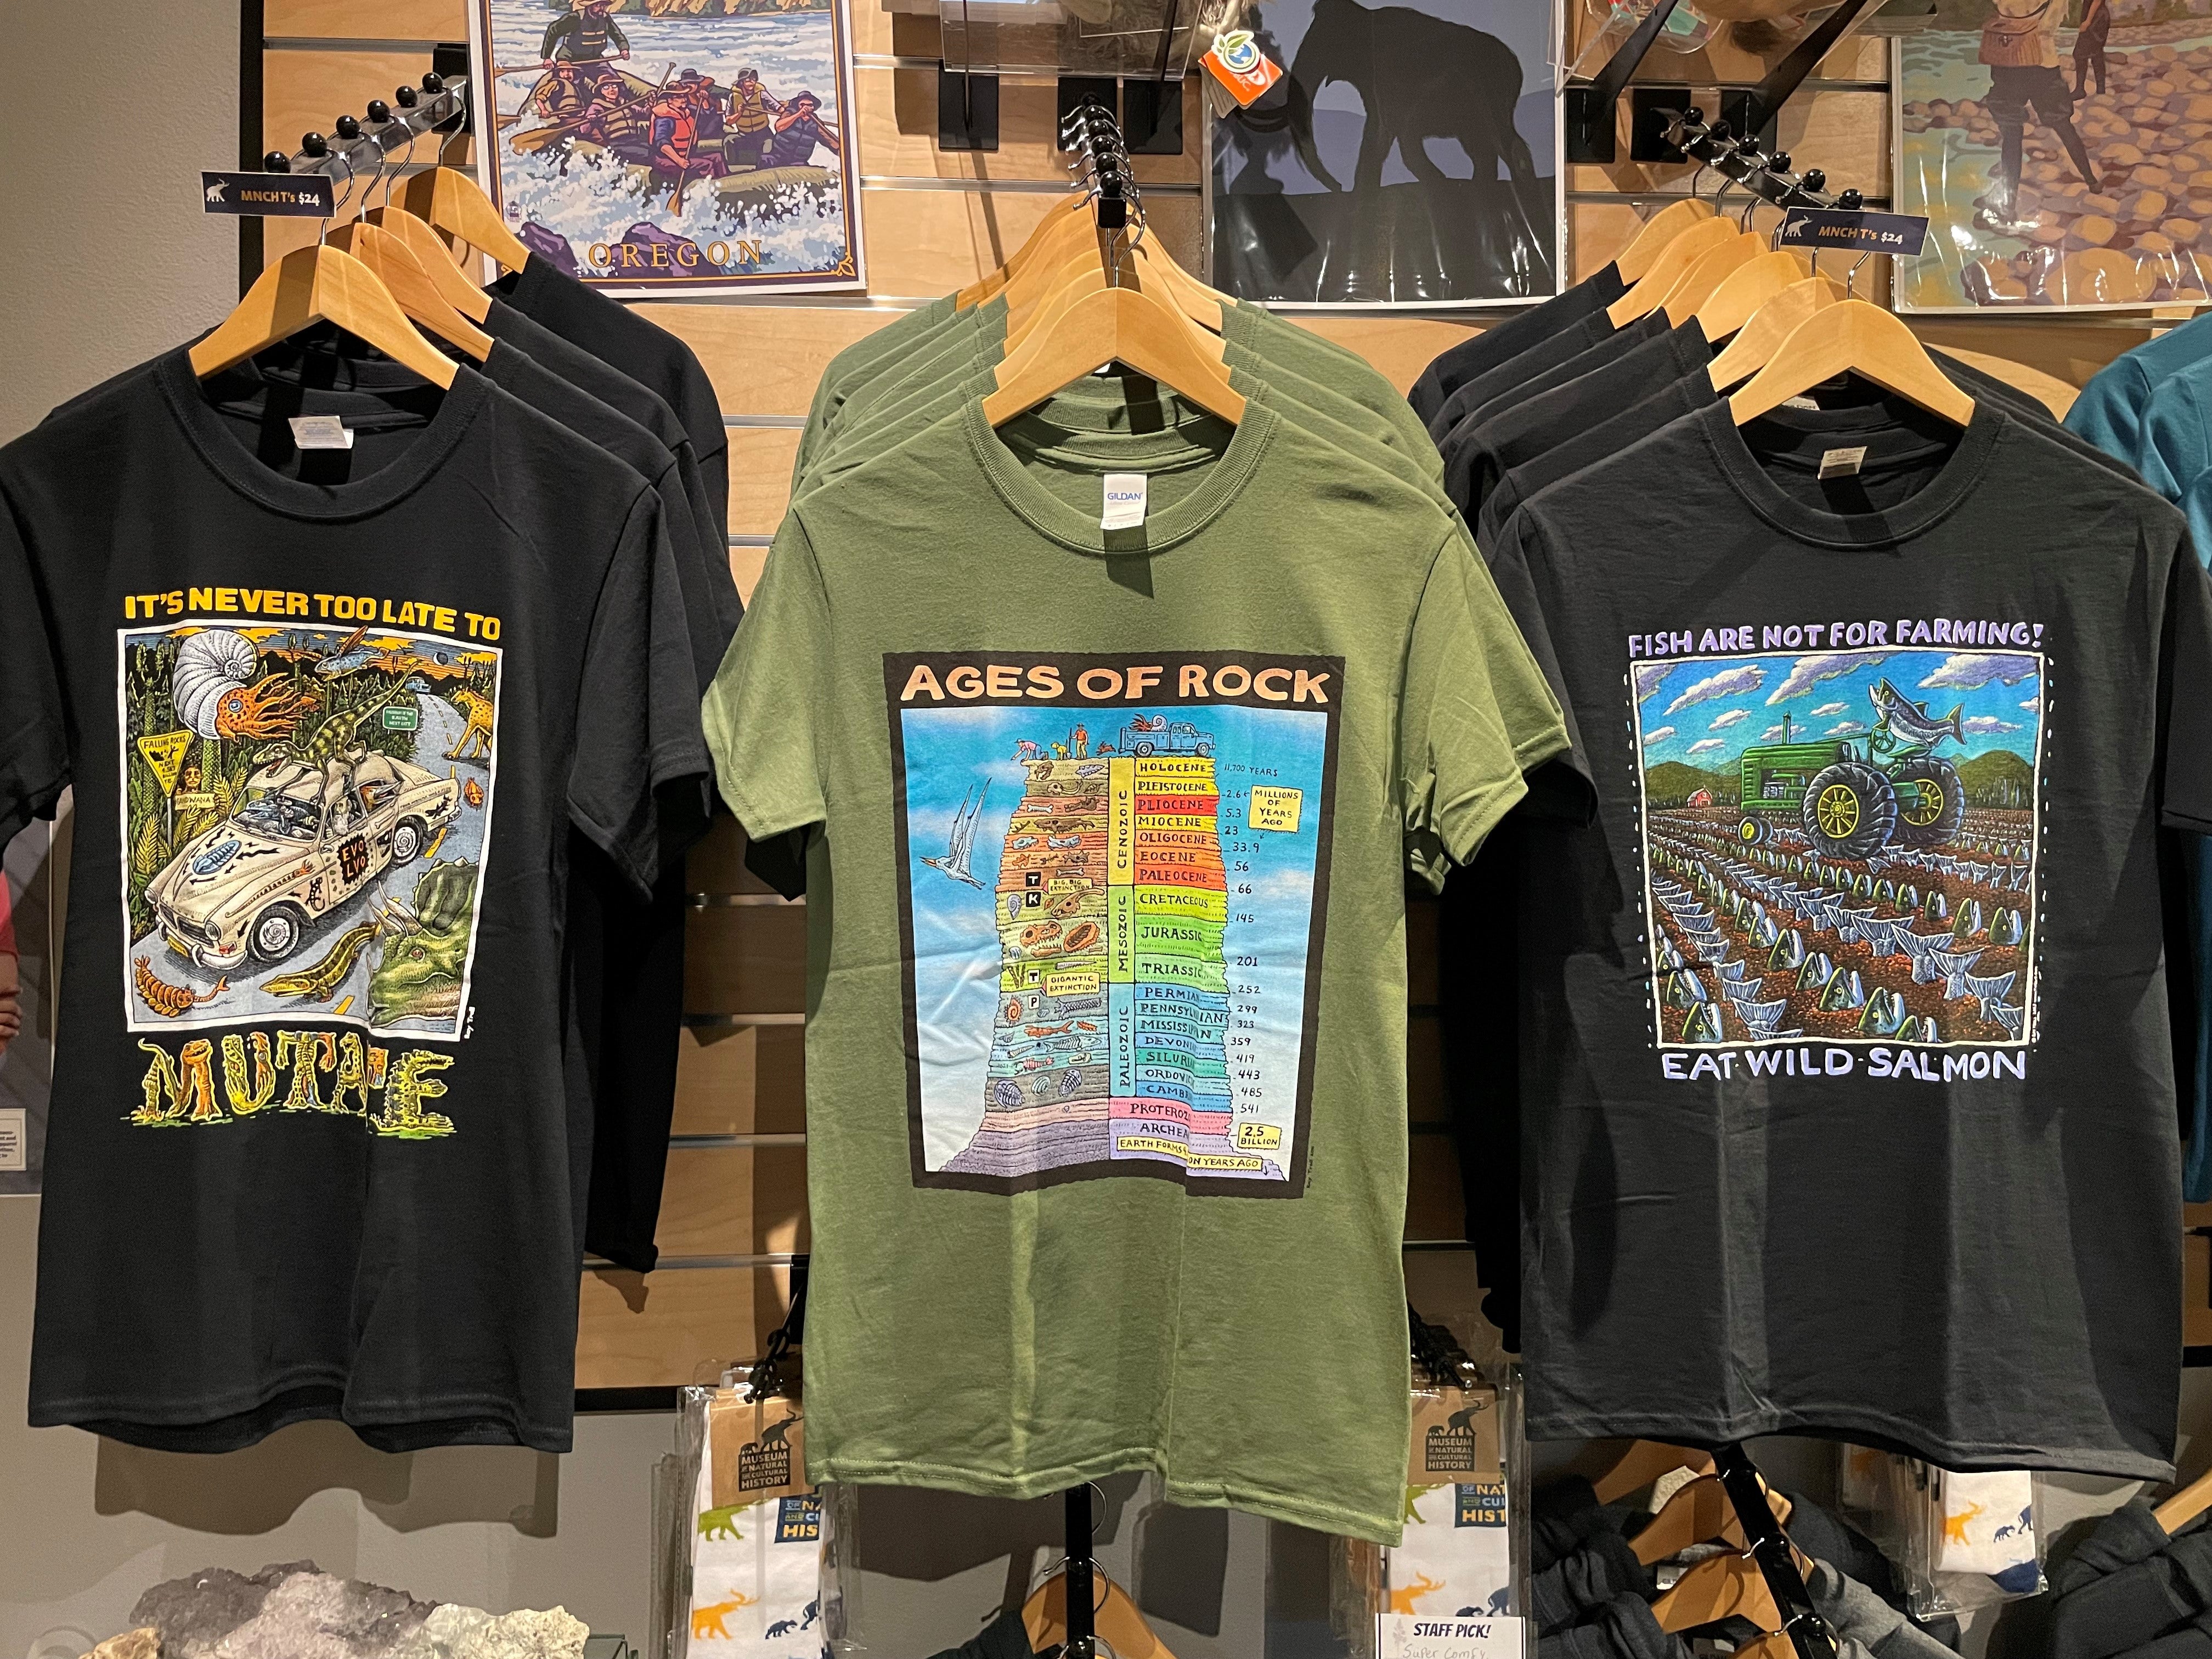 Three t-shirts in black and green with geology artwork on them.